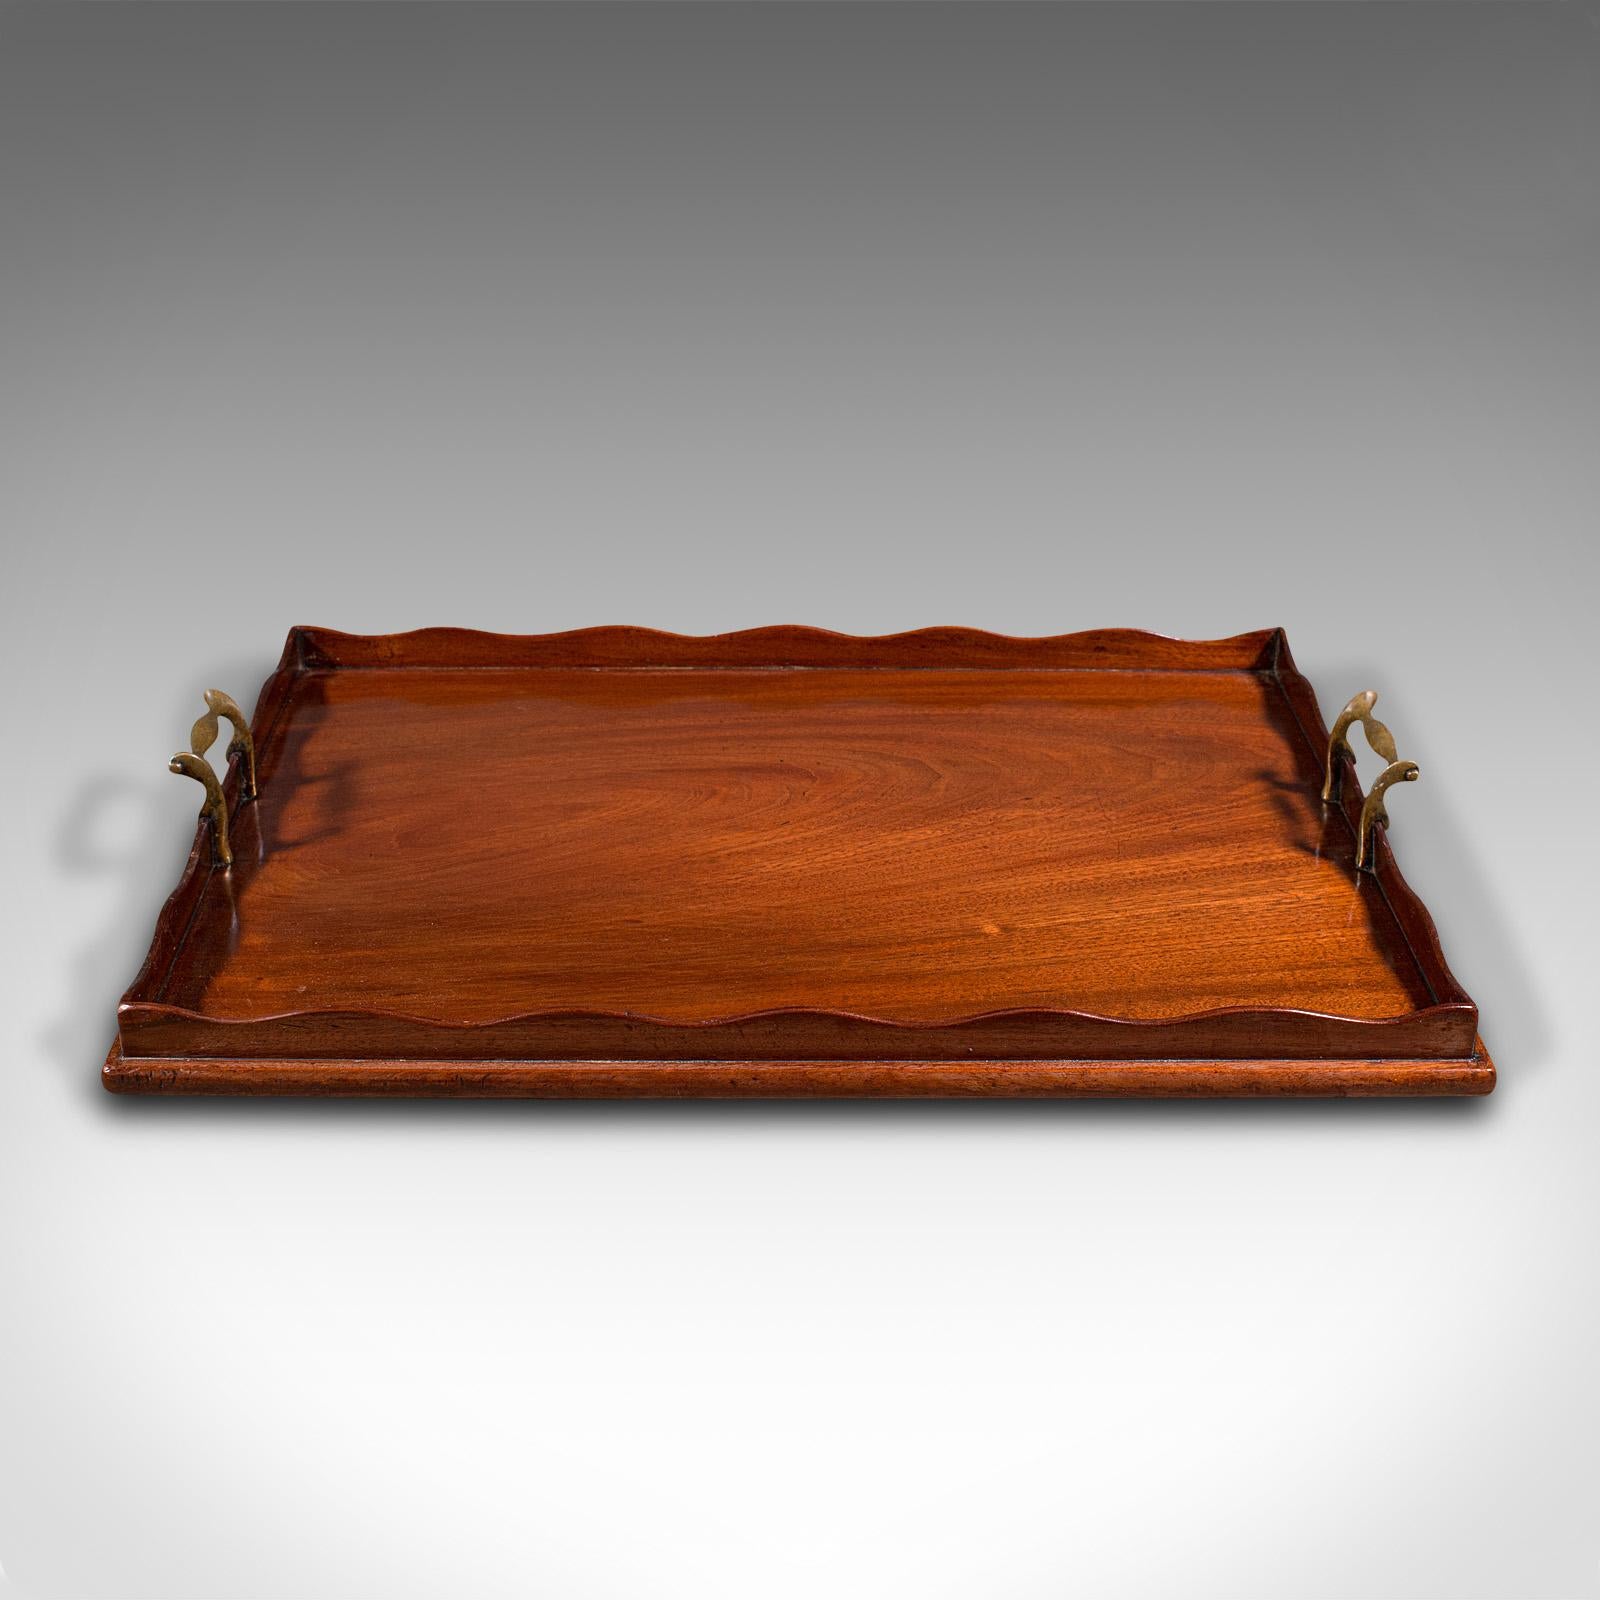 This is an antique butler's serving tray. An English, mahogany and brass tray, dating to the Victorian period, circa 1870.

Present breakfast or afternoon tea with panache
Displays a desirable aged patina - service marks to base commensurate with